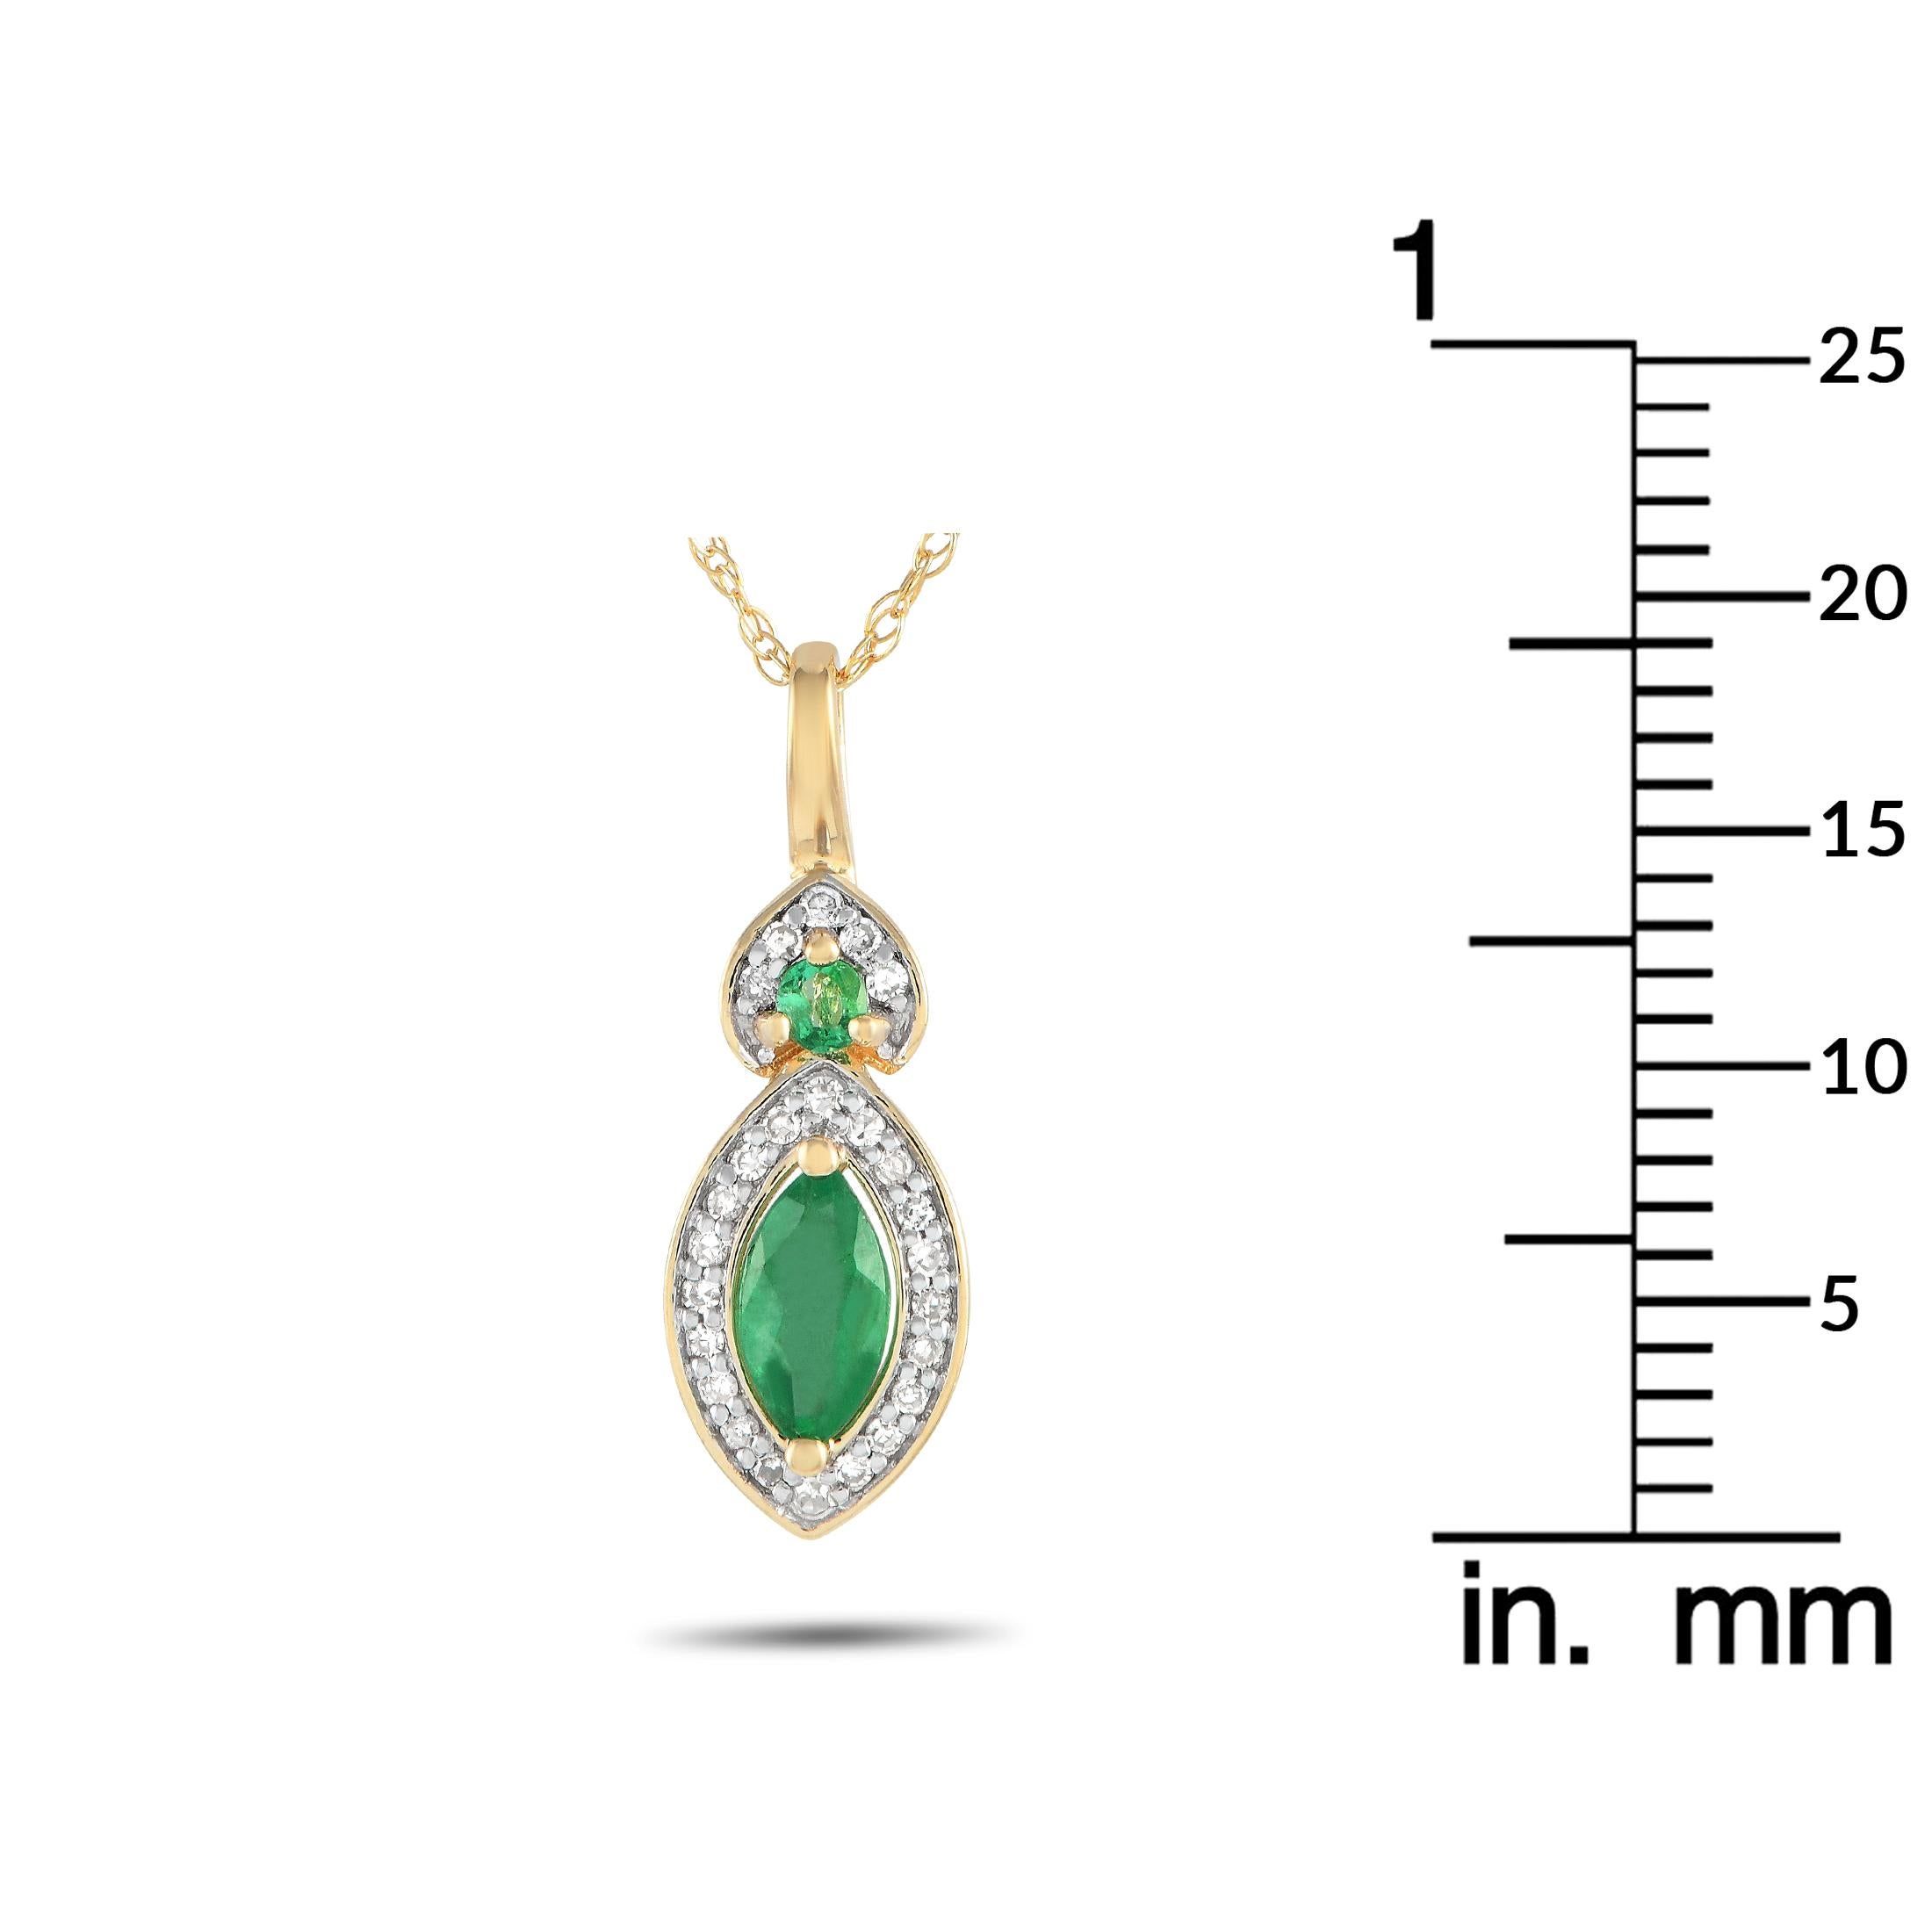 Brilliant Emerald gemstones make this necklace simply unforgettable. This piece features a 14K Yellow Gold pendant measuring 0.75 long by 0.25 wide suspended from a delicate 18 chain. Inset Diamonds with a total weight of 0.07 carats add an